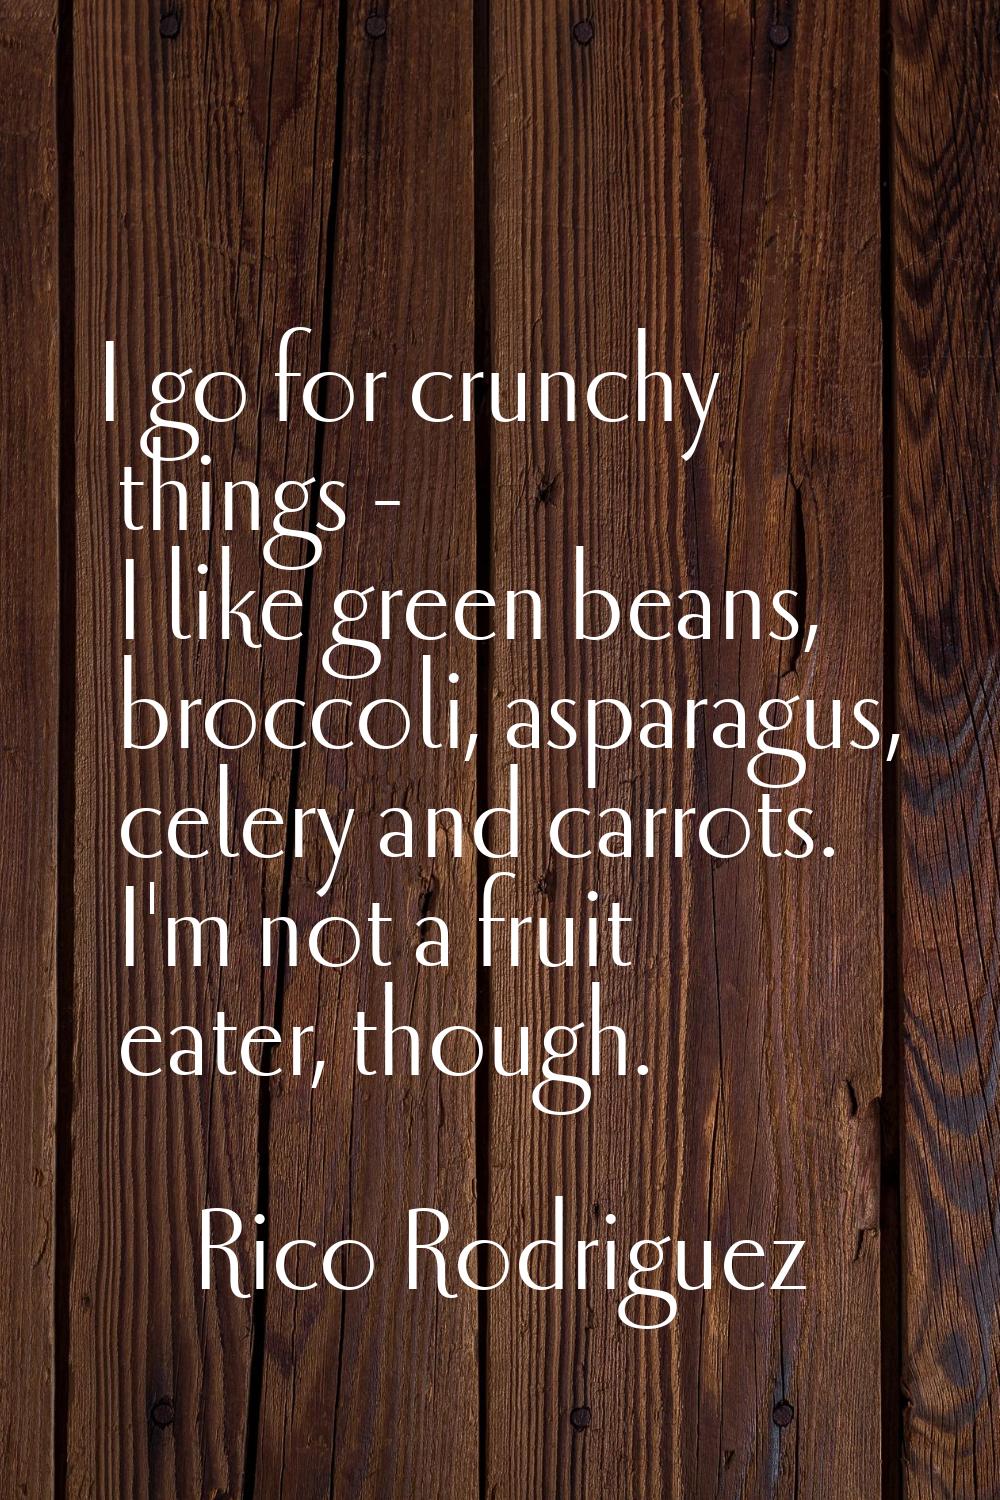 I go for crunchy things - I like green beans, broccoli, asparagus, celery and carrots. I'm not a fr